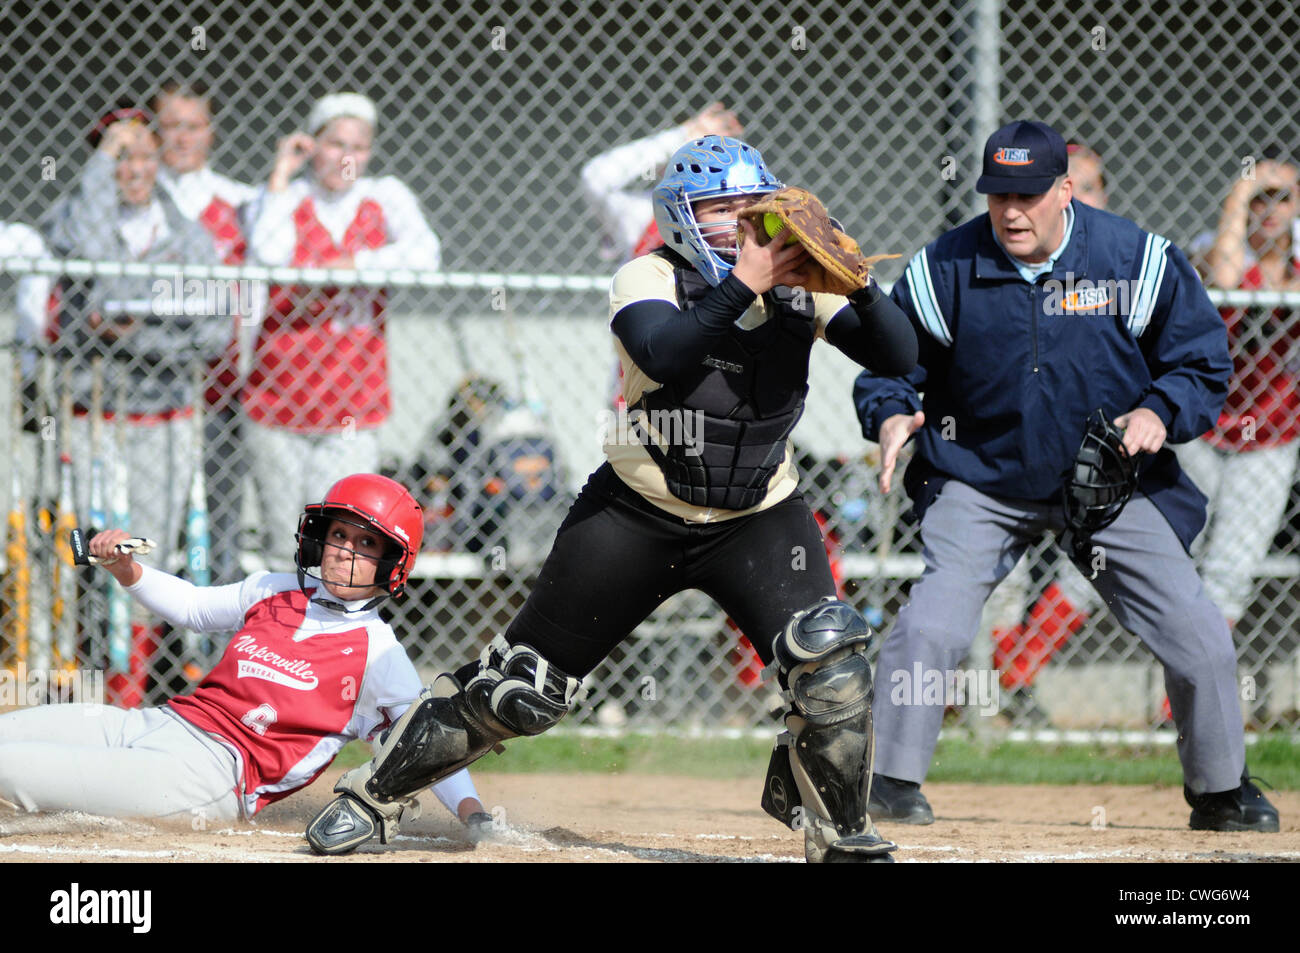 Softball Catcher records a force out at the plate on a sliding runner following an infield tapper to the pitcher. USA. Stock Photo